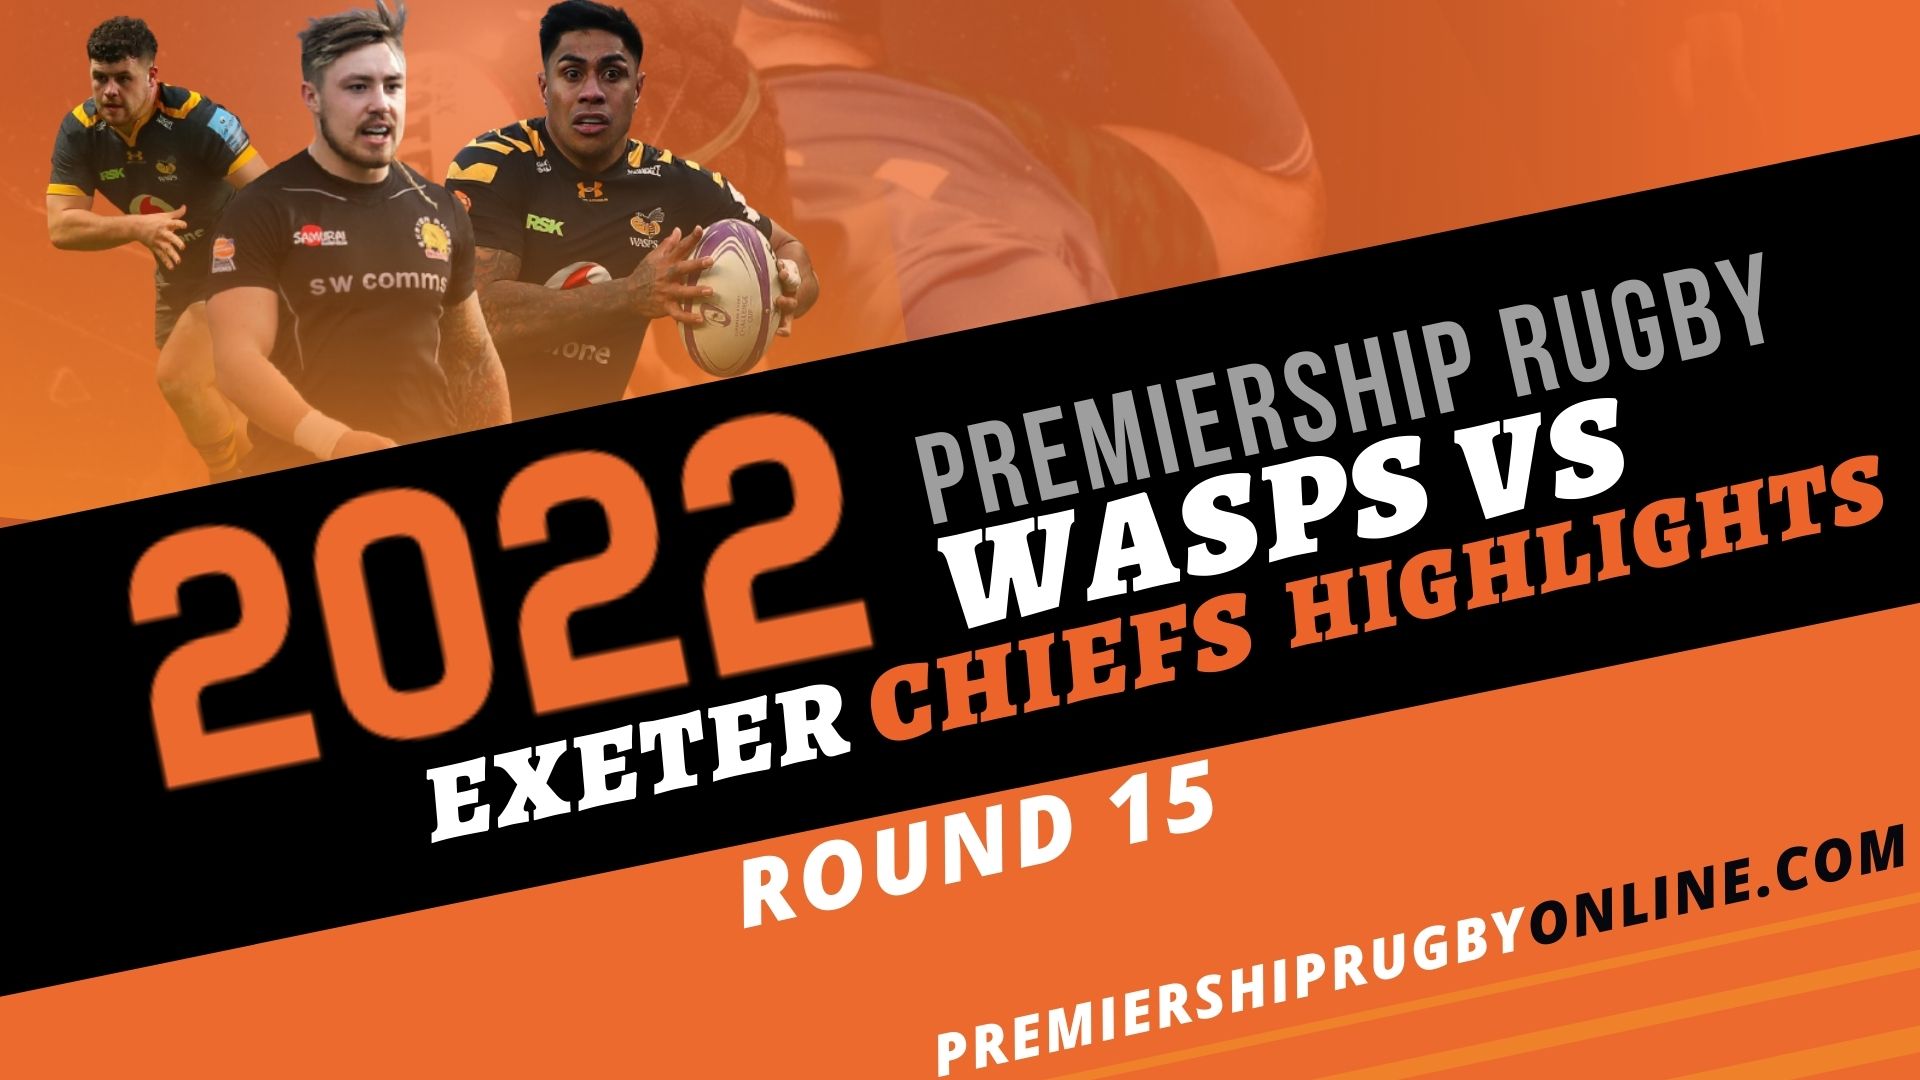 Exeter Chiefs Vs Wasps Highlights 2022 RD 15